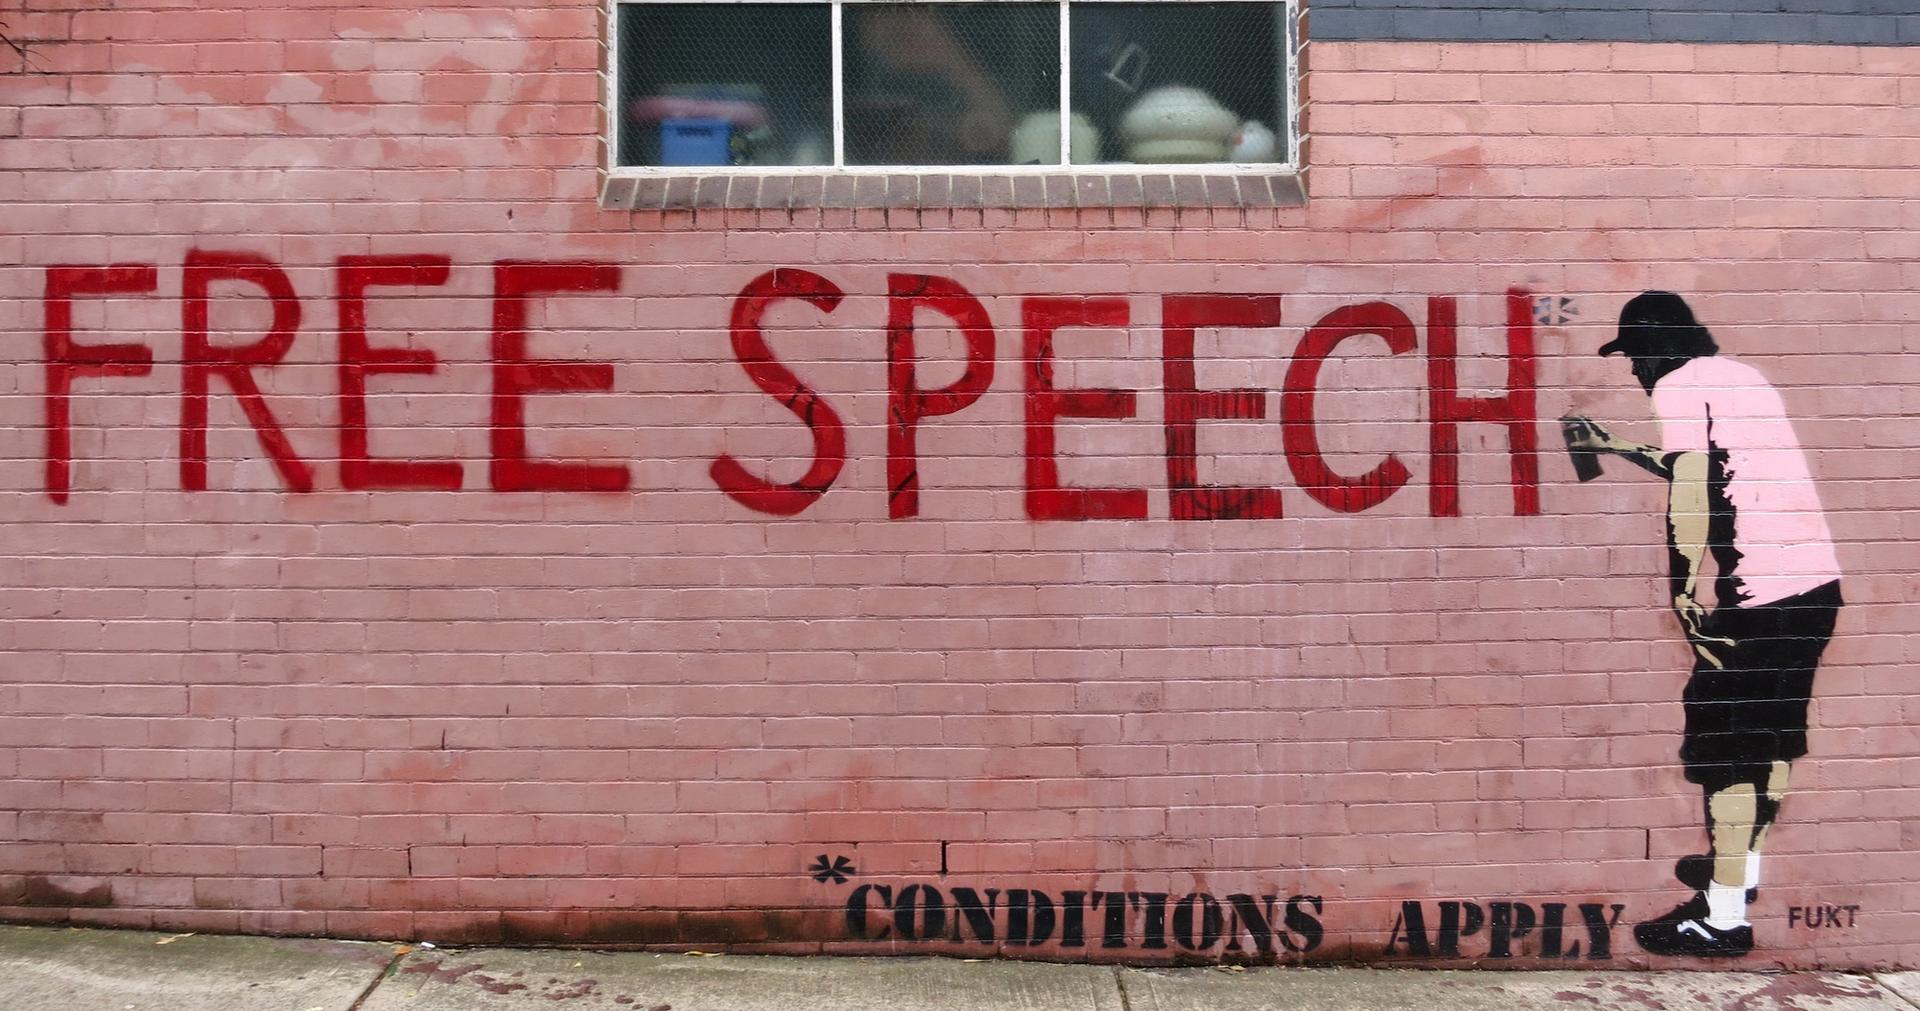 Street art. The graffito depicts a man spray-painting the words 'FREE SPEECH' in bold uppercase red letters. An asterisk at the end of the phrase is spelled out at the bottom of the wall, meaning 'conditions apply'